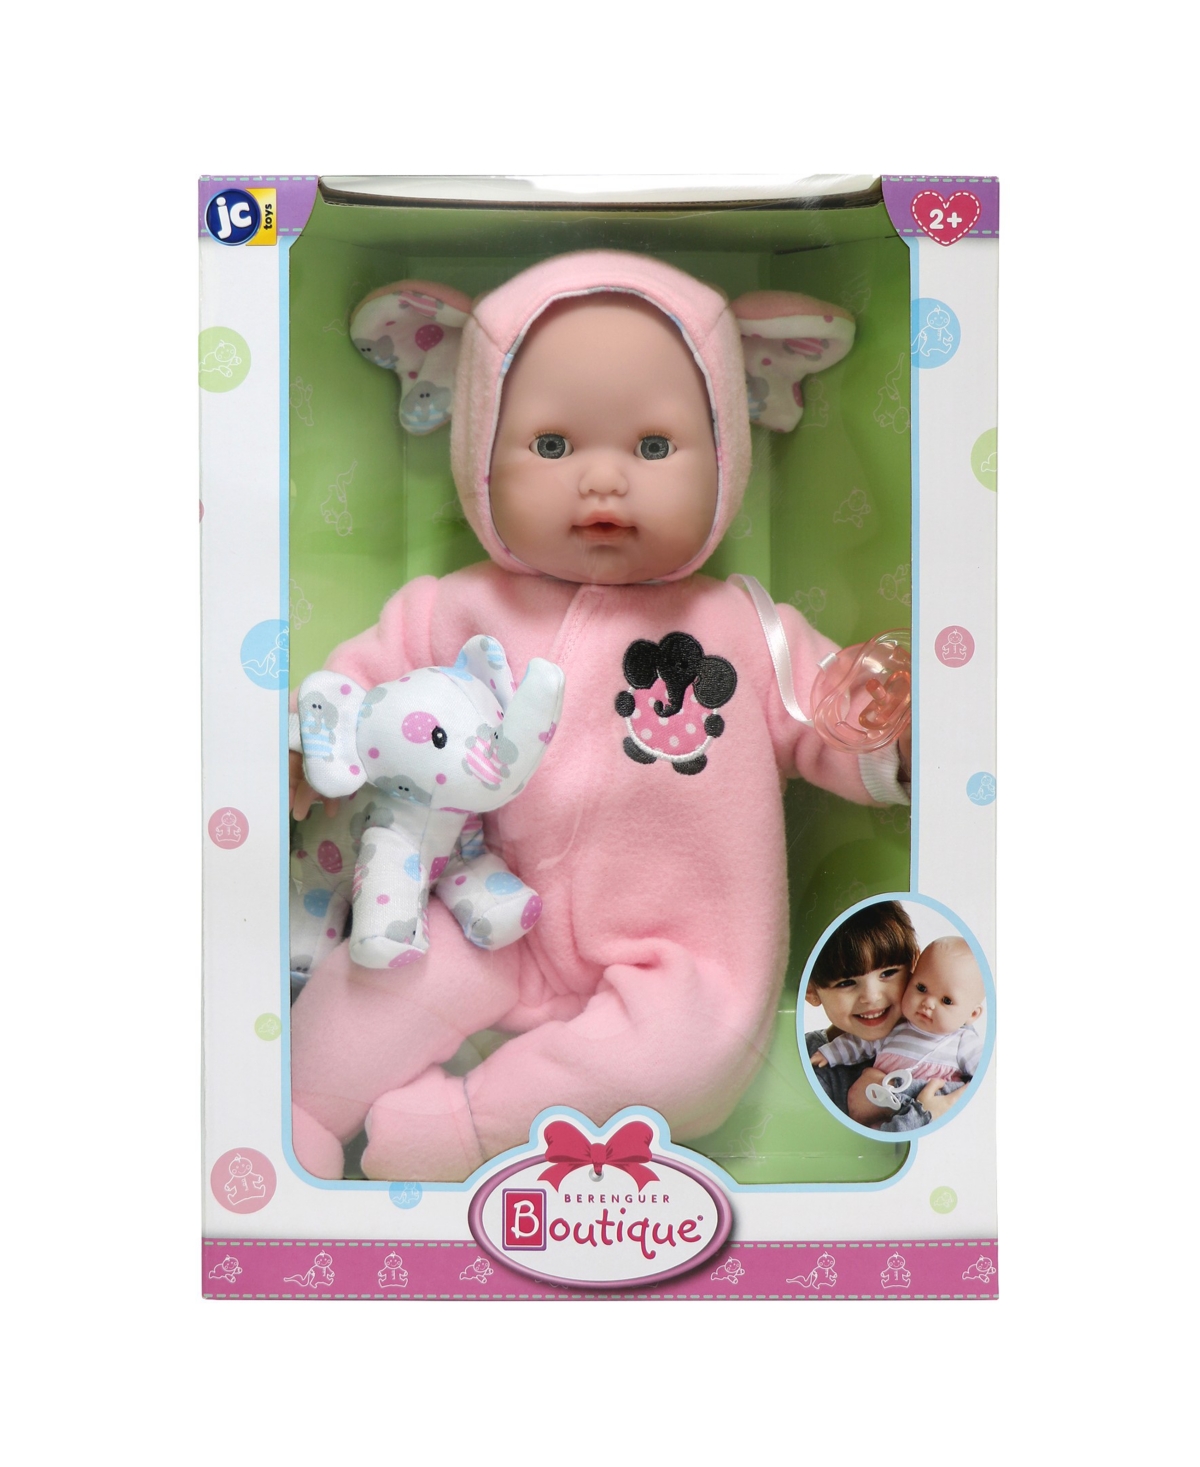 Shop Jc Toys Berenguer Boutique 15" Soft Body Baby Doll Elephant Pink Outfit In Pink Elephant Theme